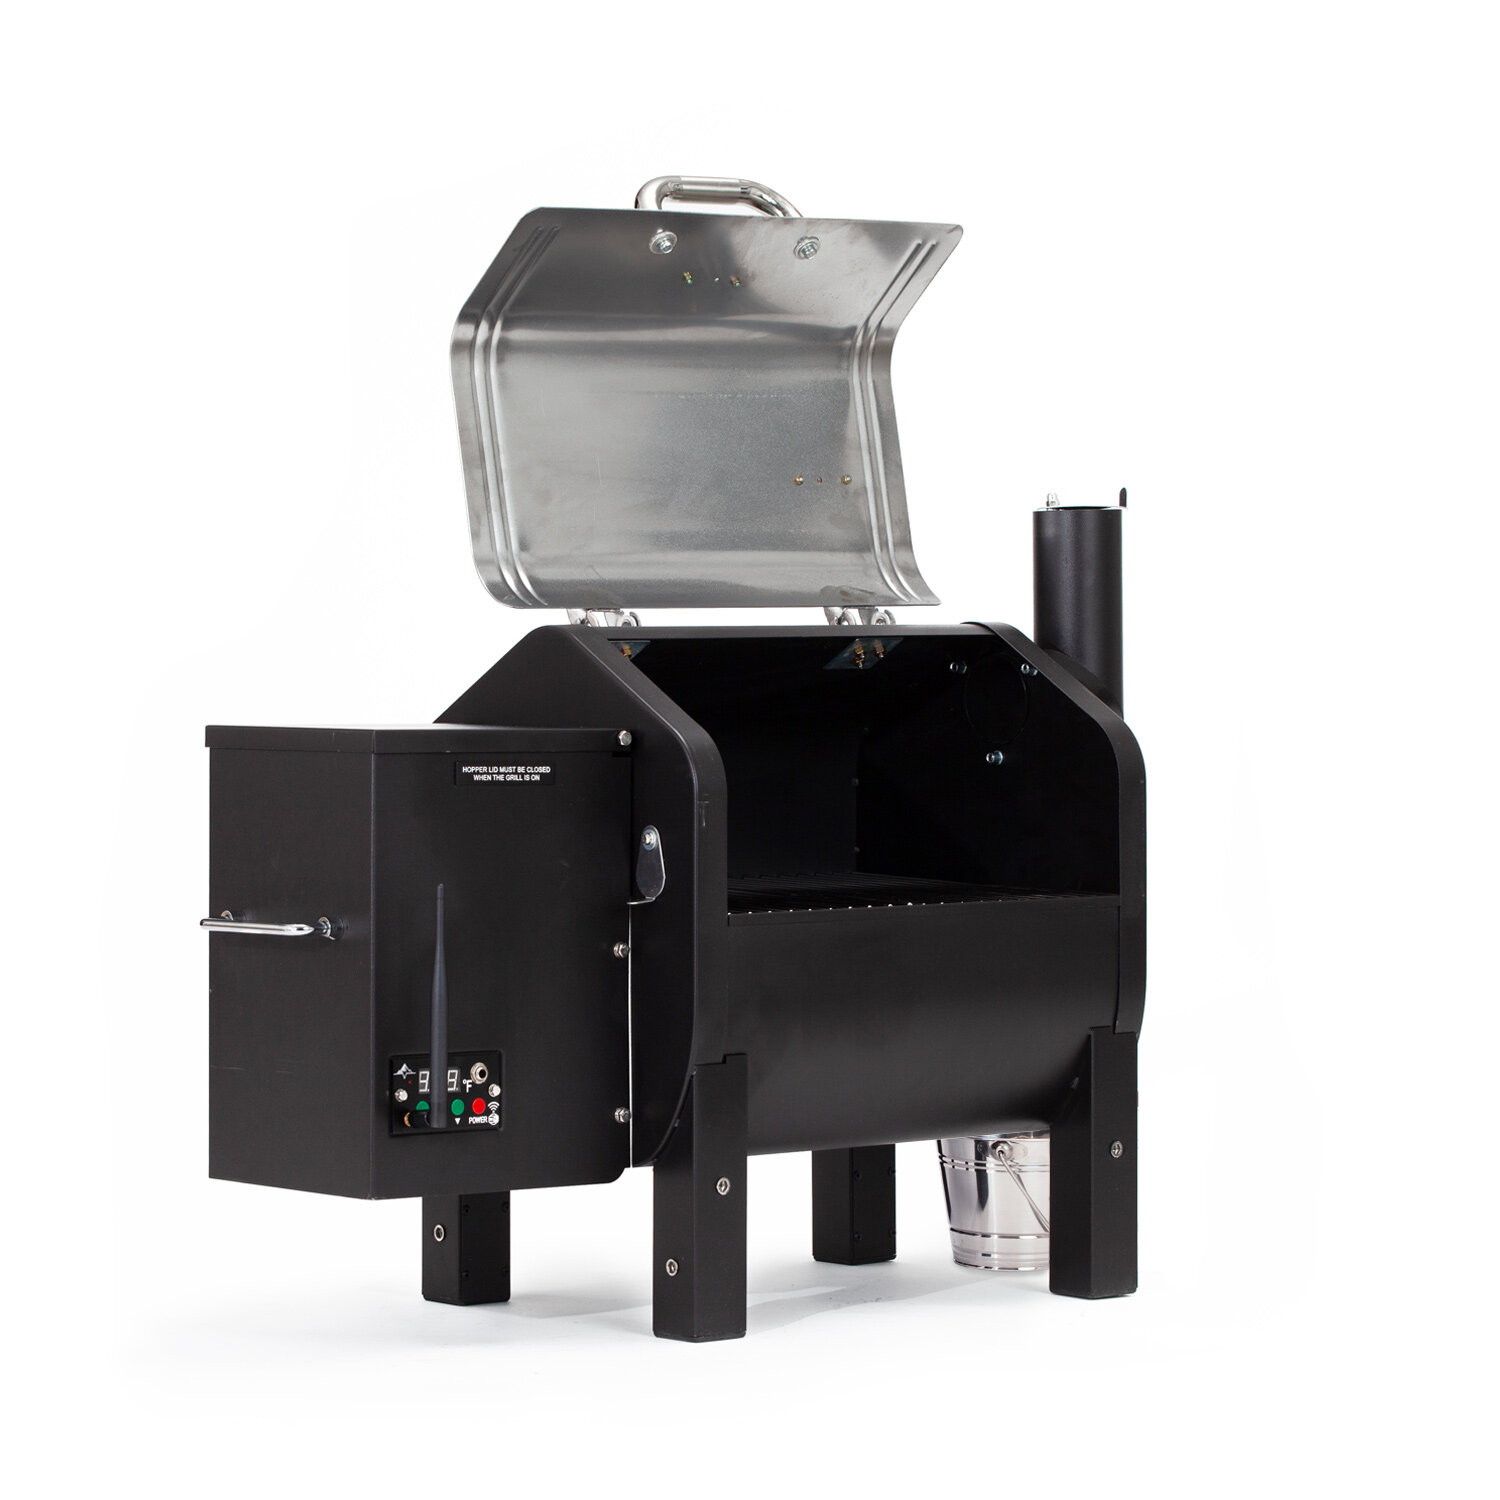 GMG Offset Wood Portable 219 Square Inches Smoker & Grill & Reviews